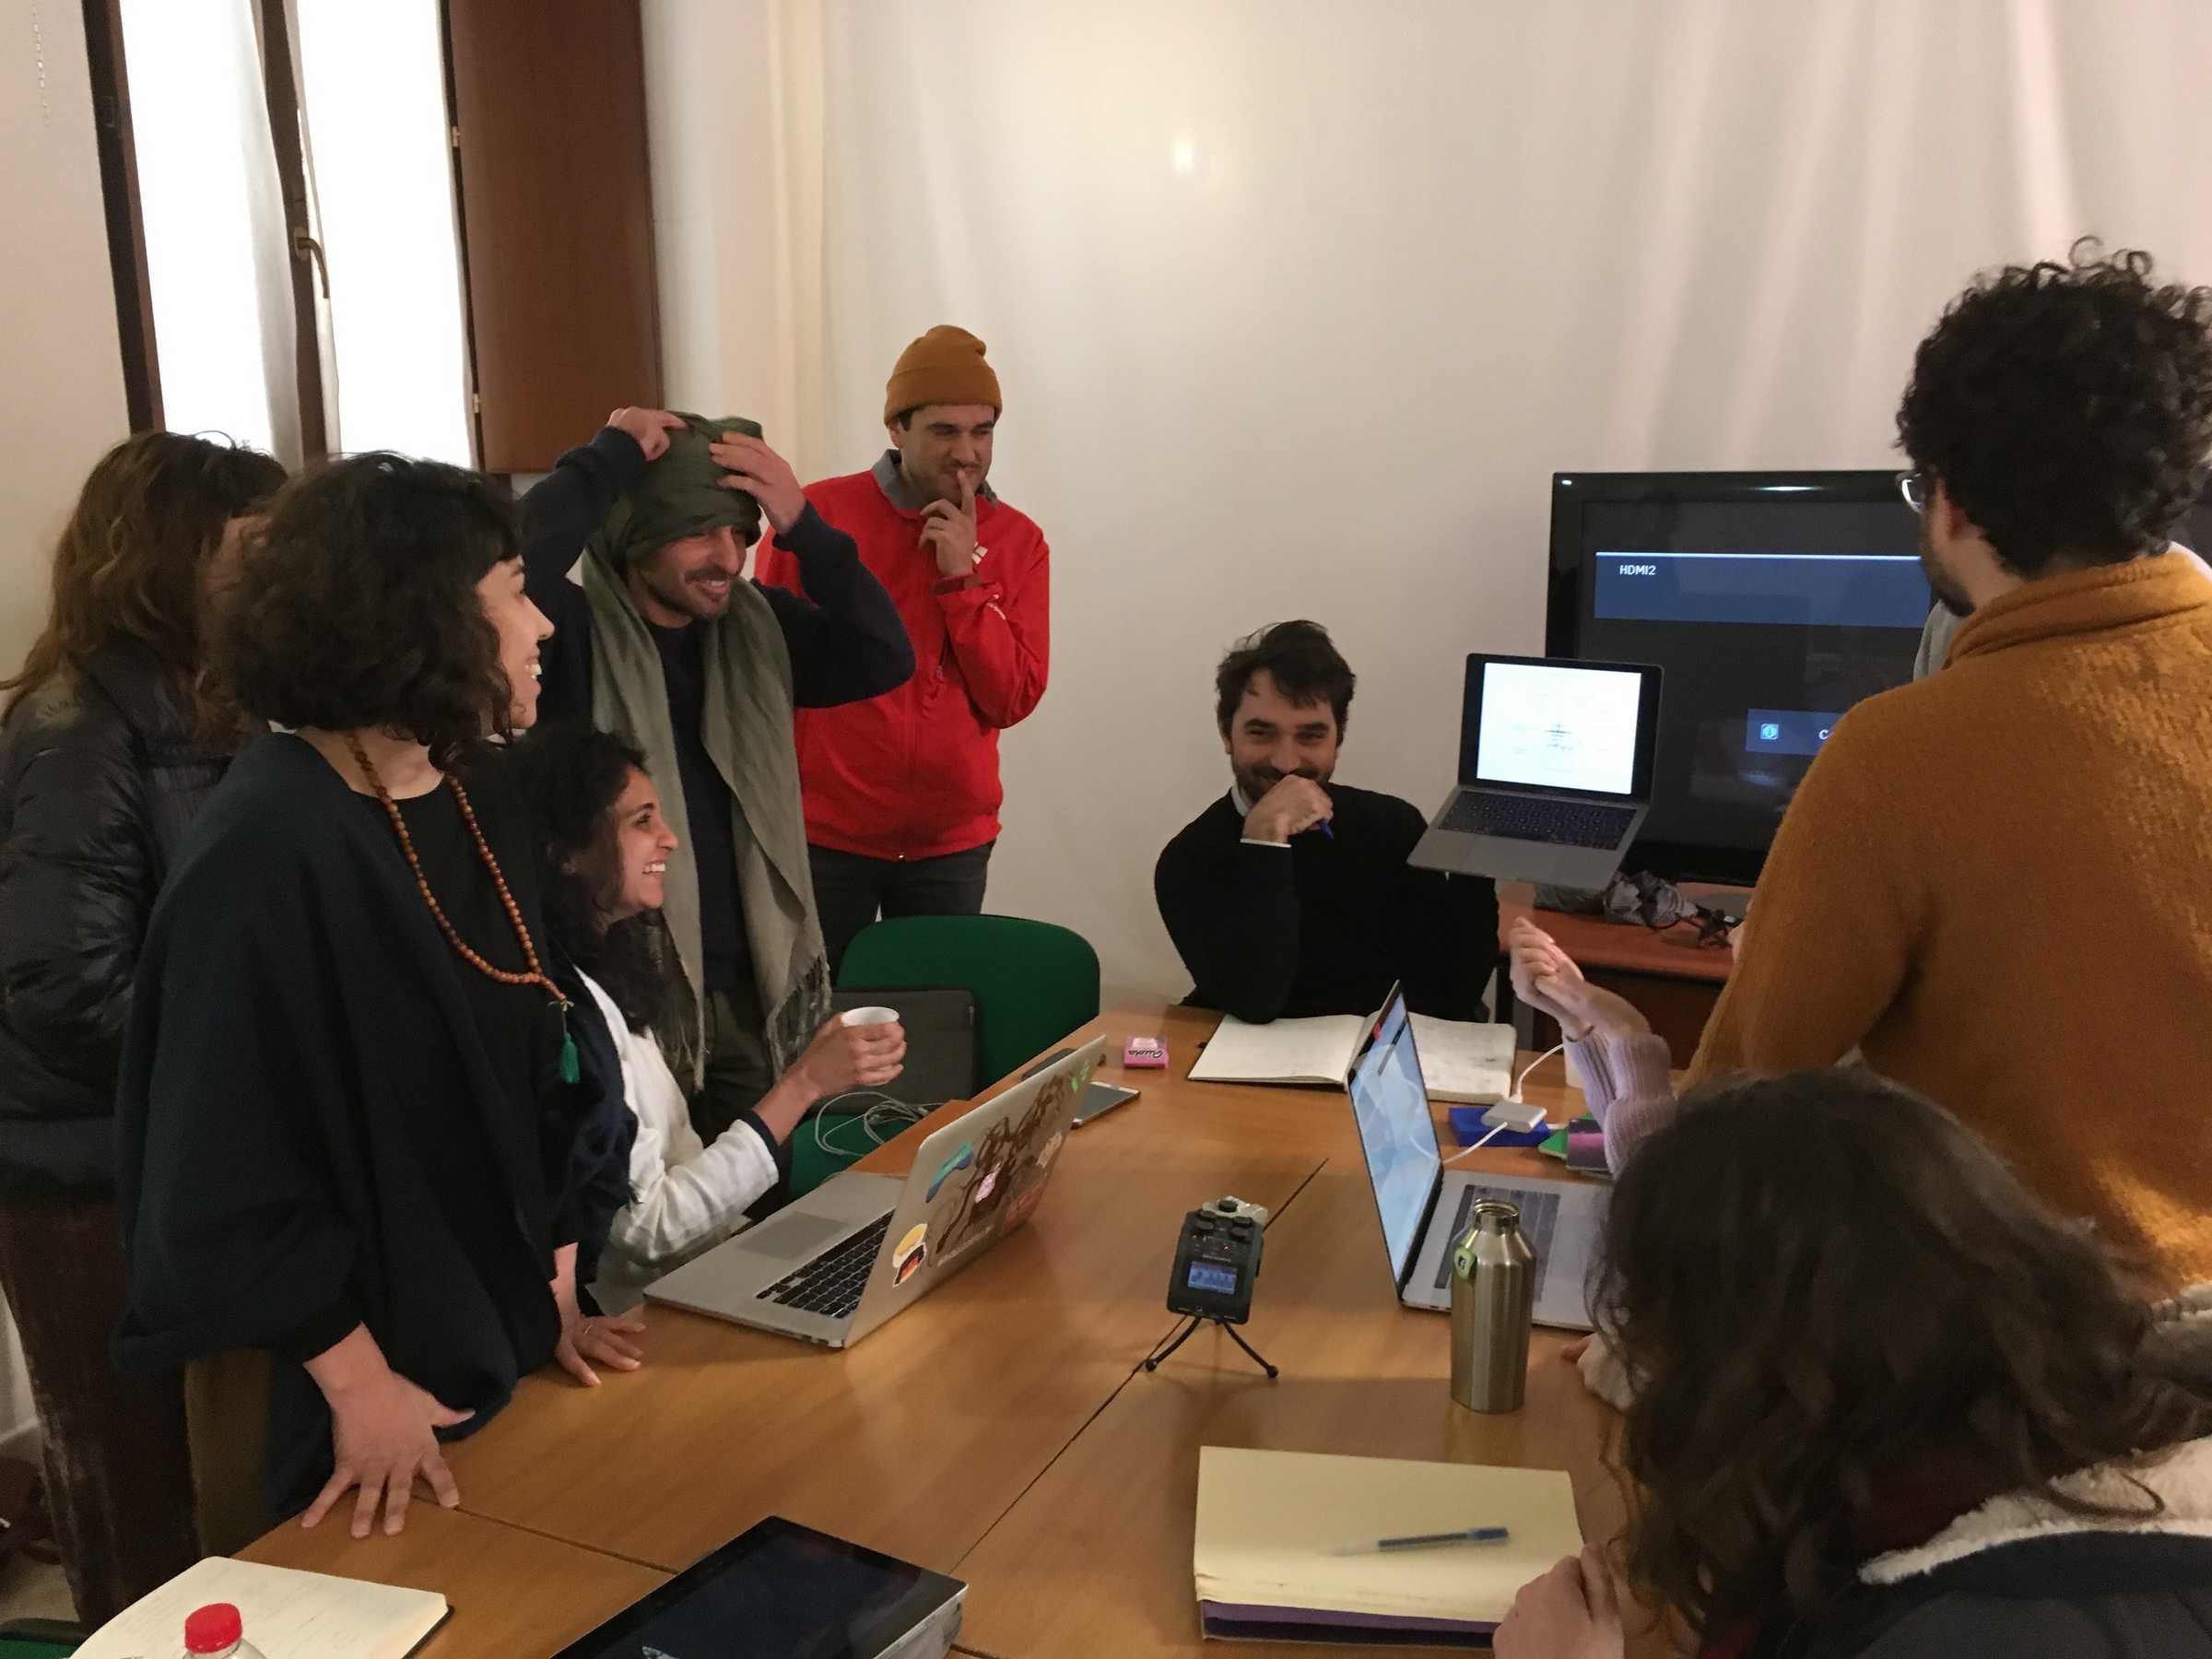 HOW TO DO THINGS WITH THEORY ~ Anselm Franke's seminar in Cagliari. DAI Week January 2019. Photo credit: Jacq van der Spek.  